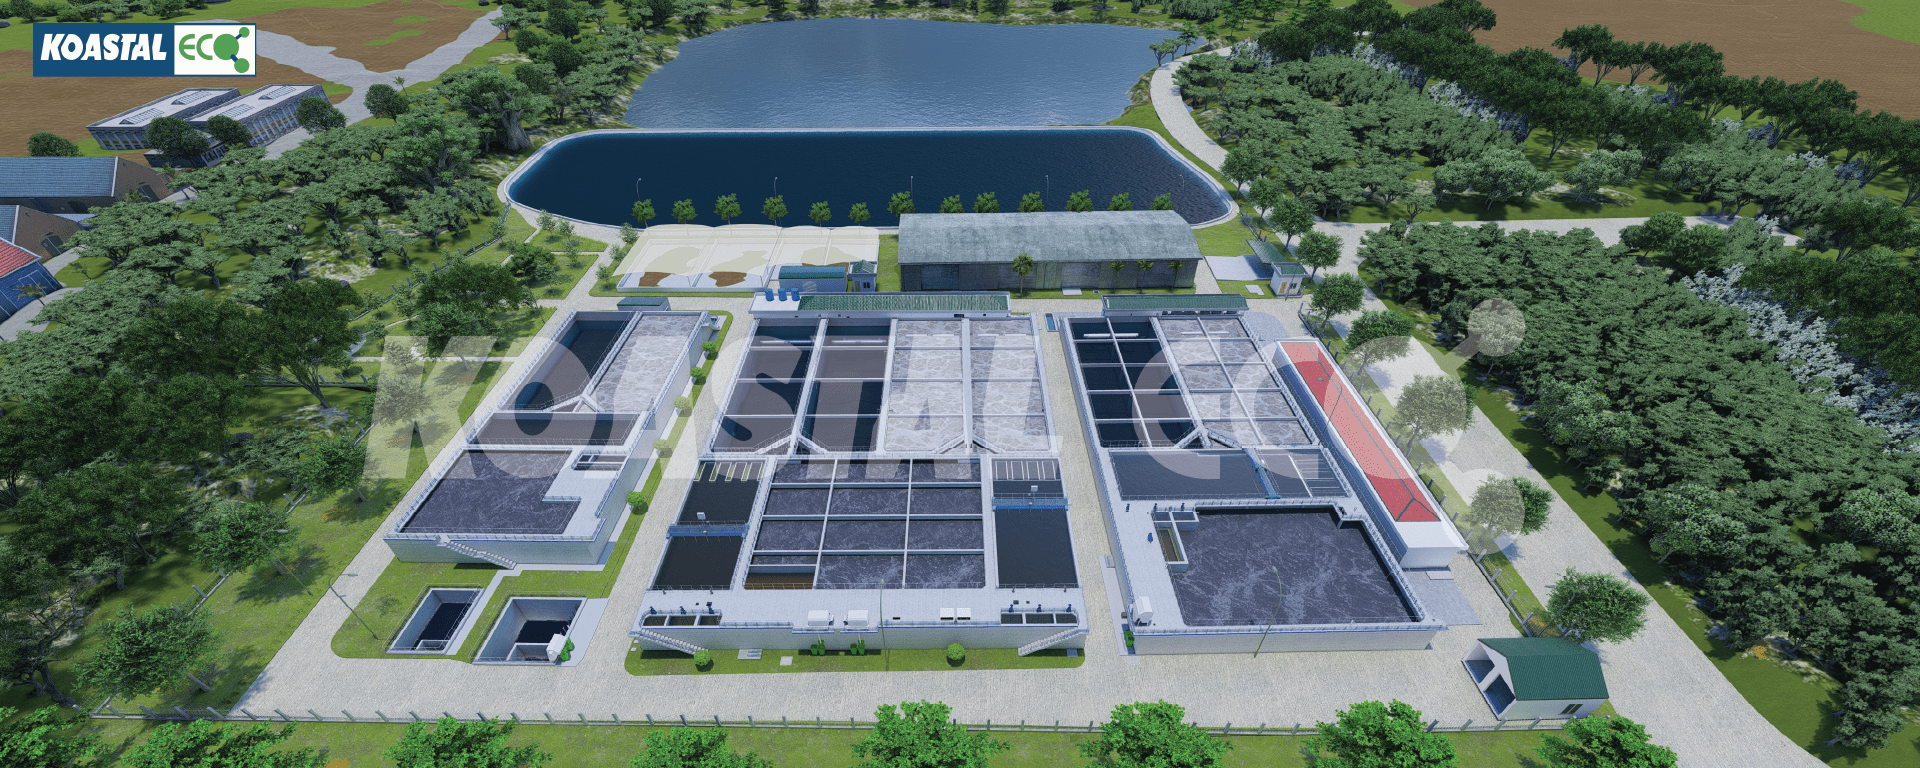 The centralized wastewater treatment plant of Khai Quang Industrial Park